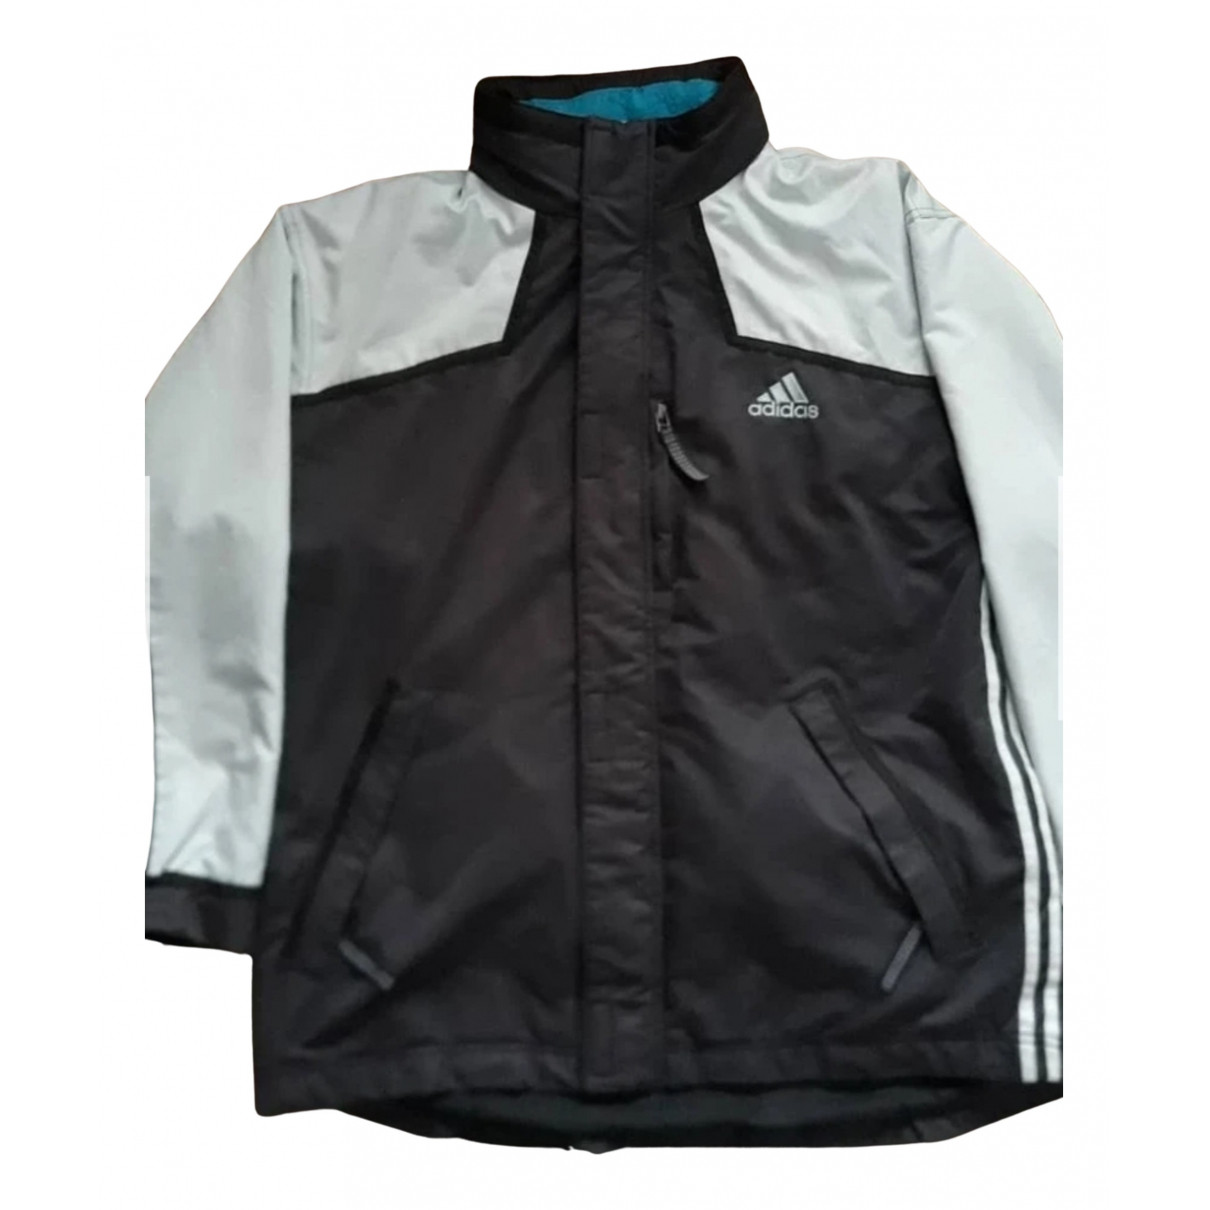 clothing Adidas jackets for Male Polyester M International. Used condition